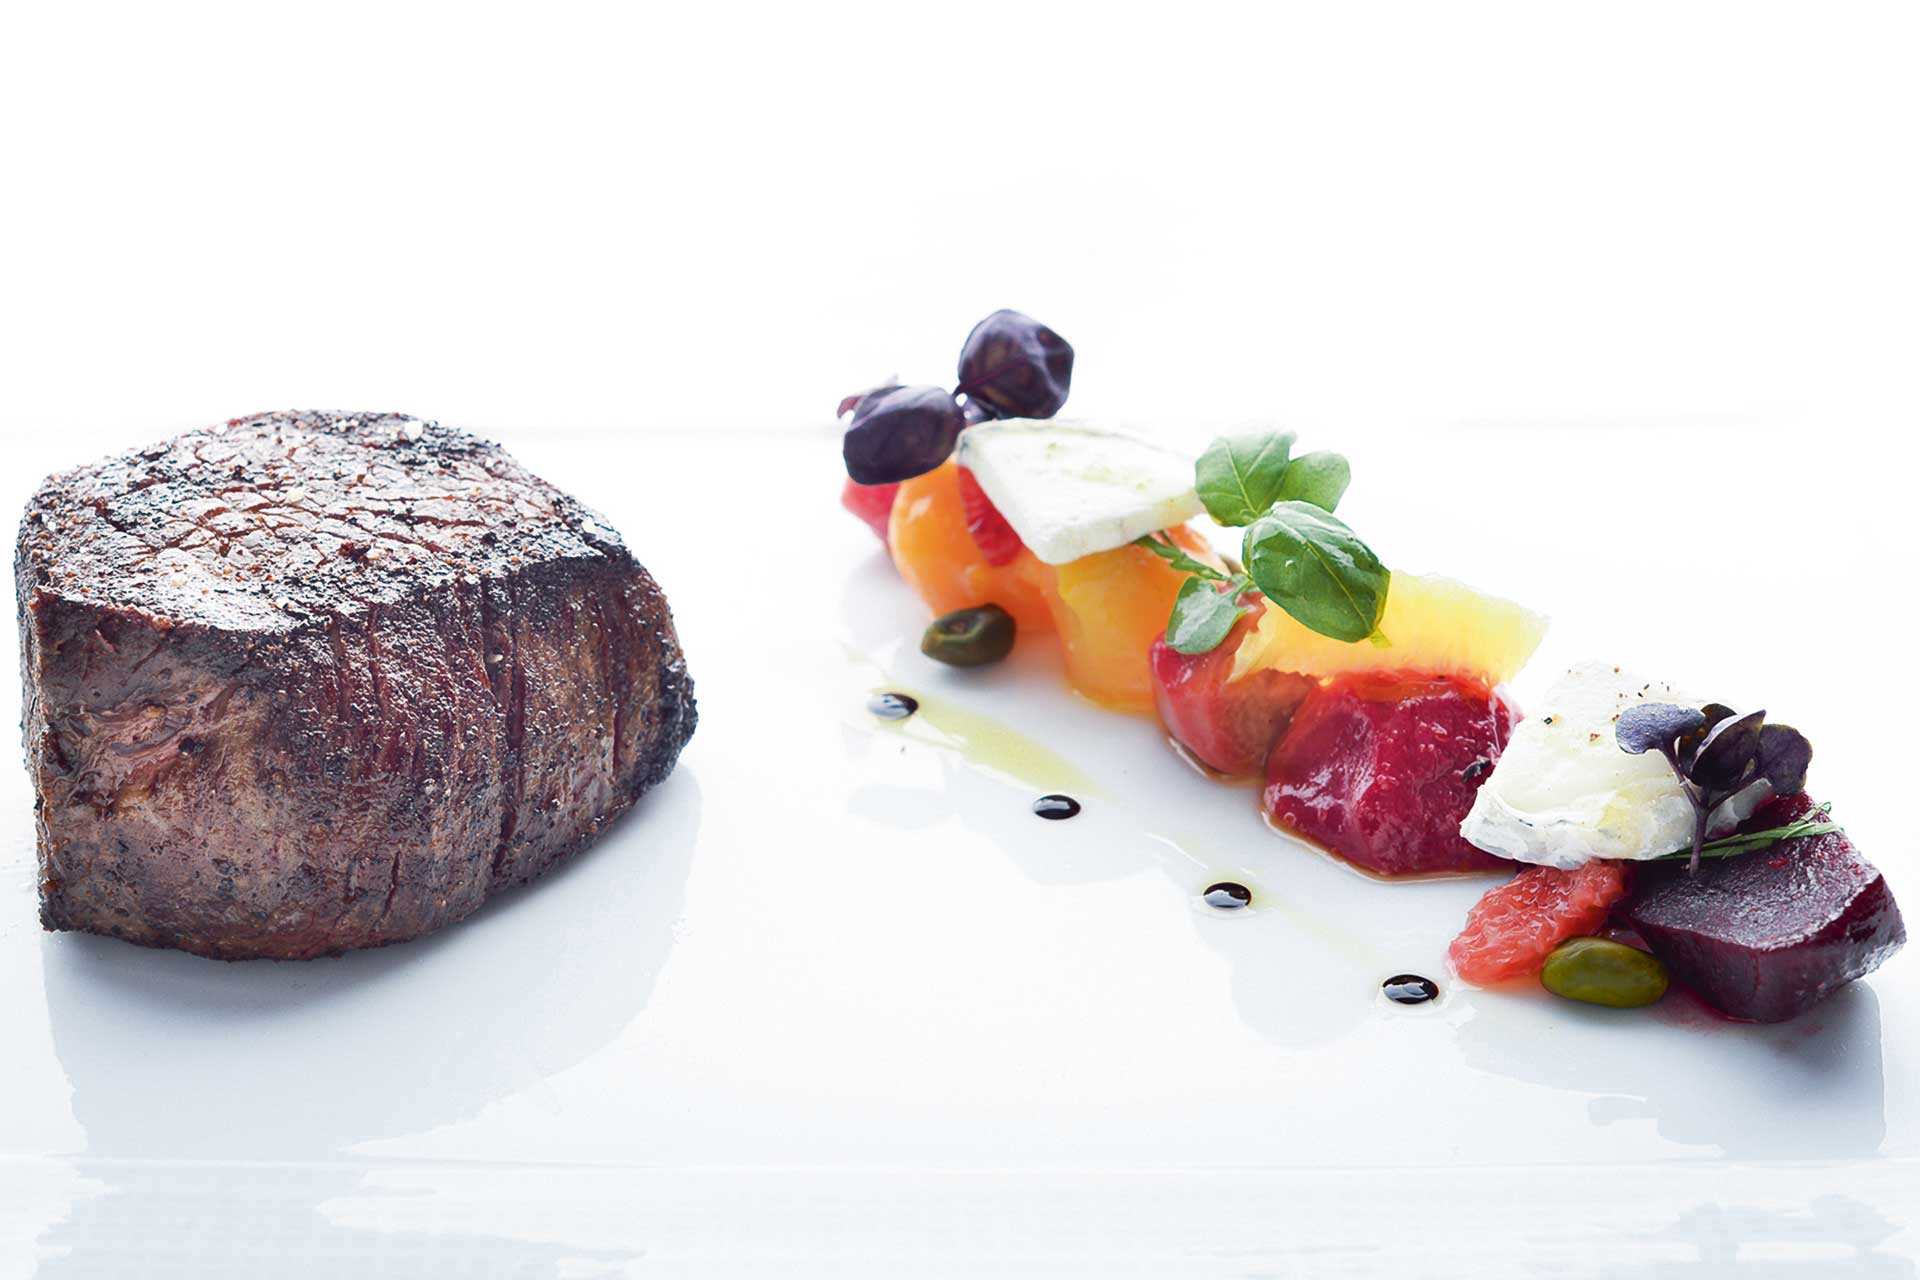 Cut's menu at 45 Park Lane offers fillet steak and salad by Wolfgang Puck